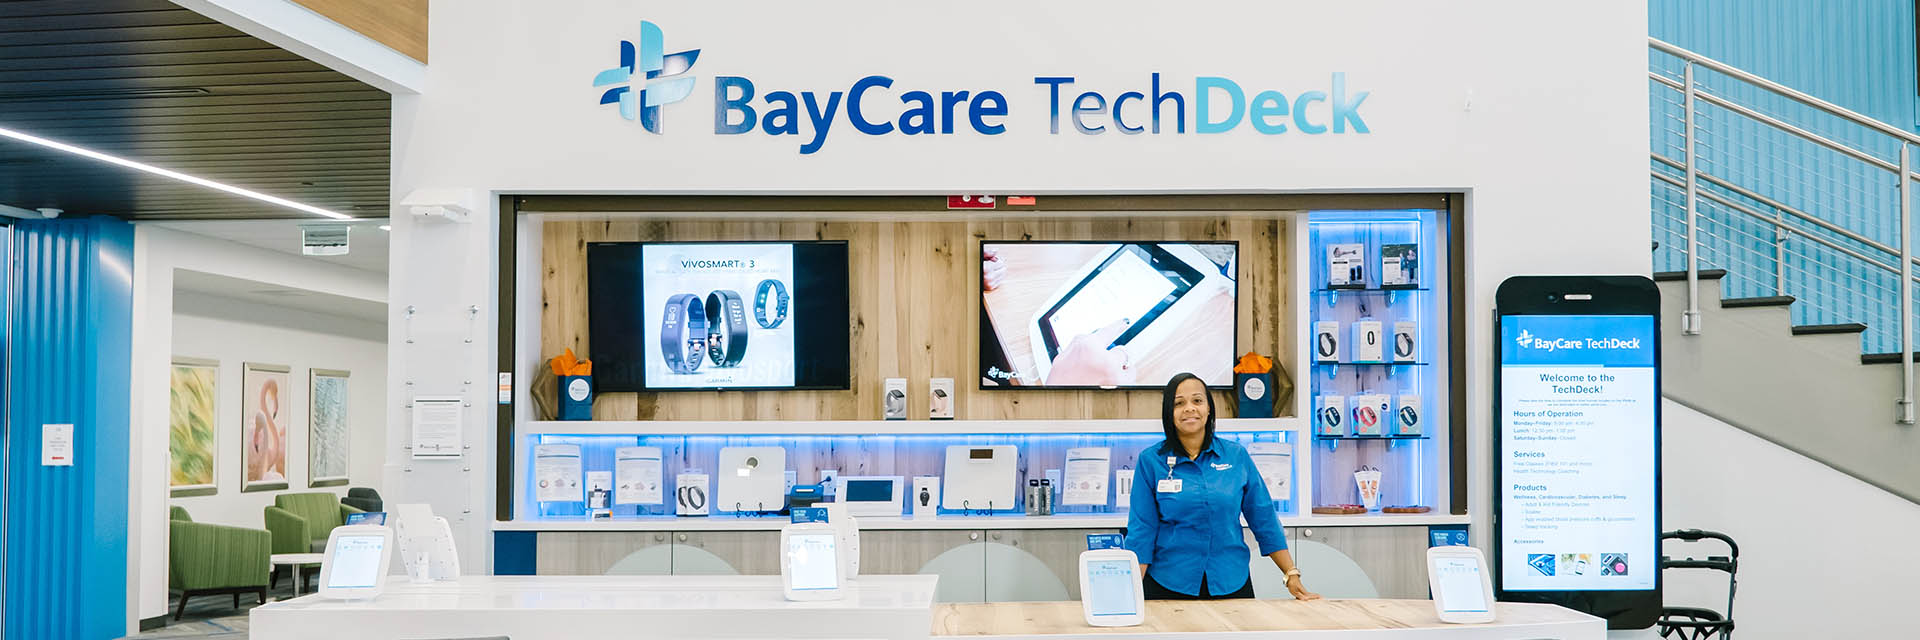 A team member is standing in front of the BayCare TechDeck at a BayCare HealthHub.